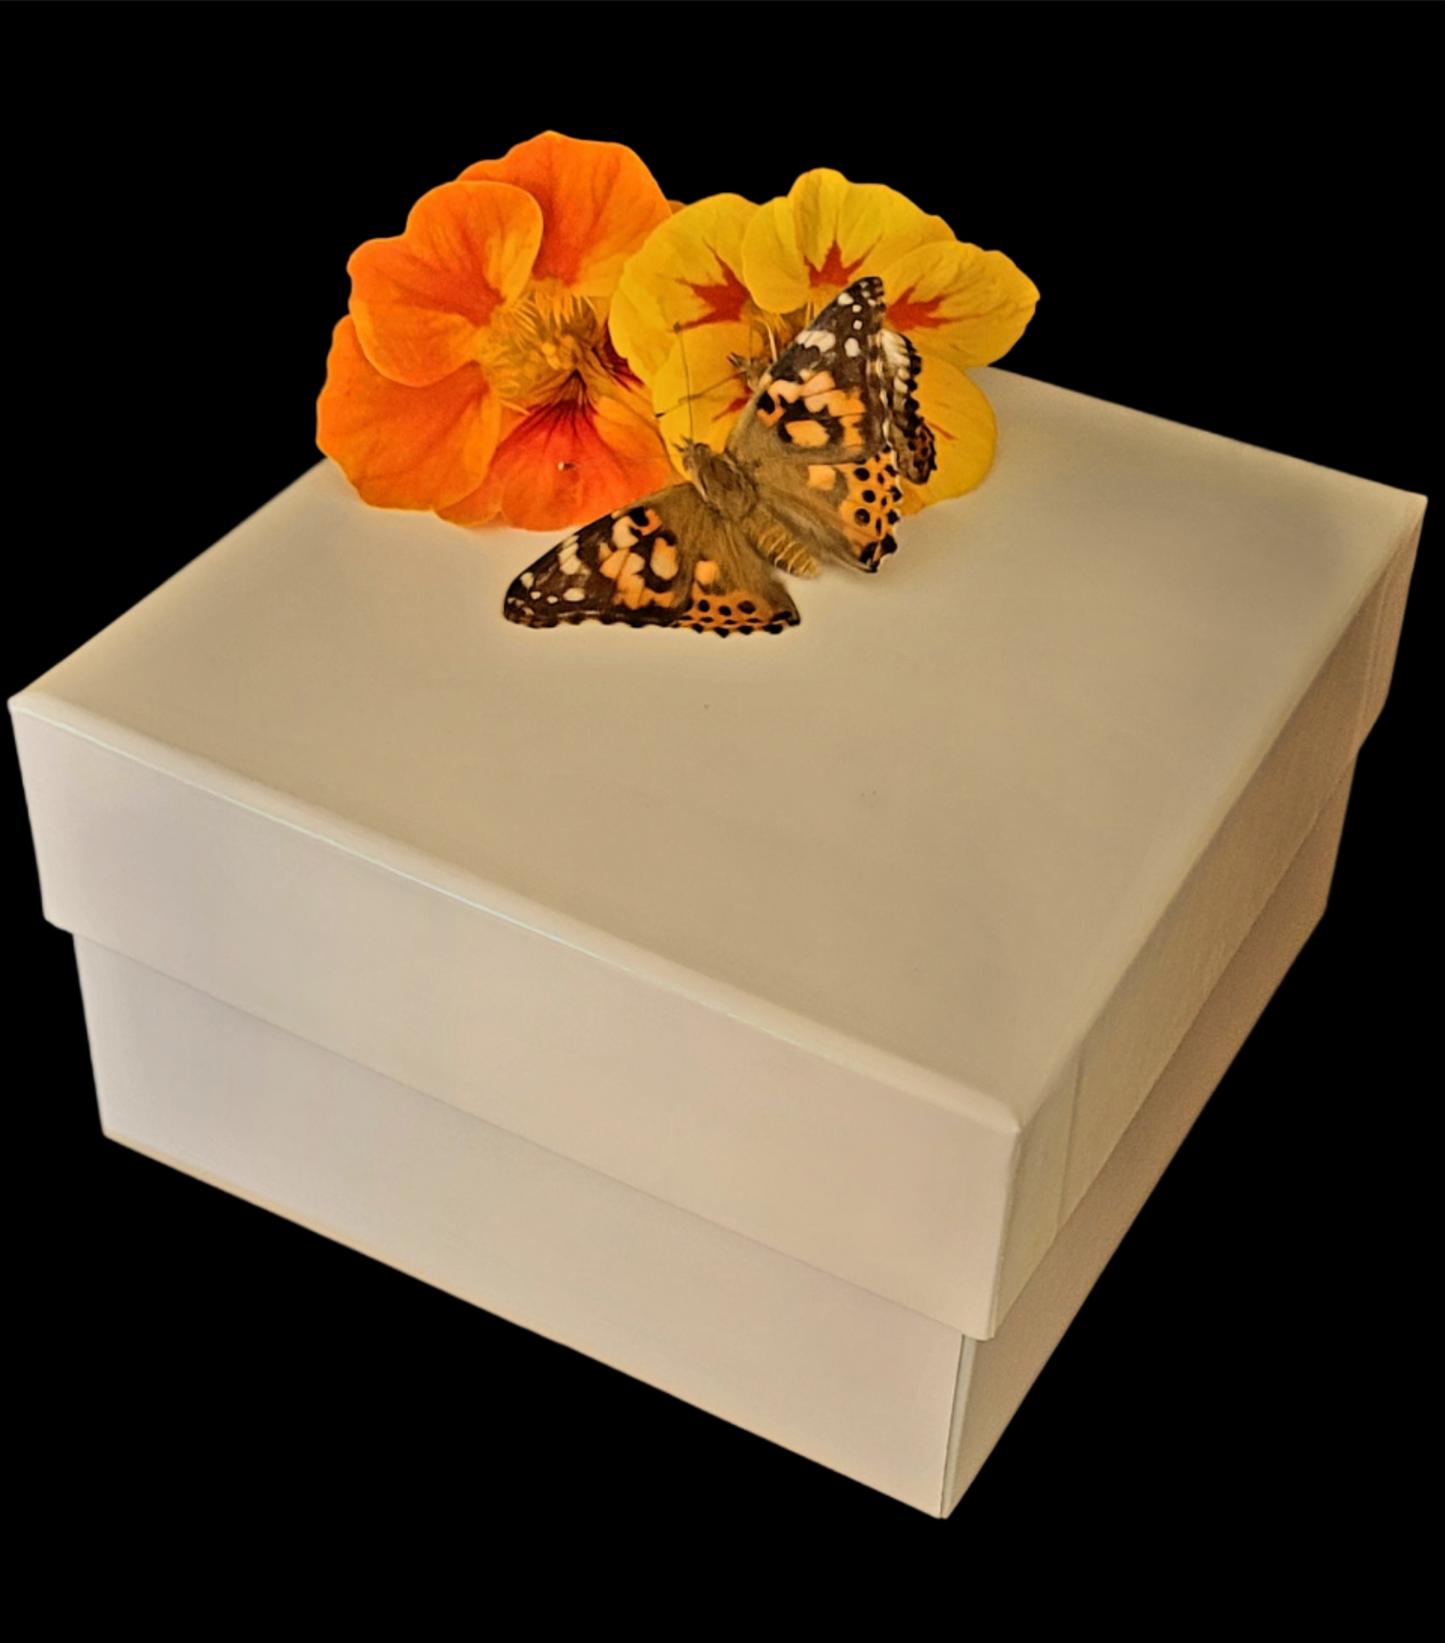 40 Painted Lady Butterflies in a Plain Mass Release Box ~ Please read IMPORTANT INFO BELOW before placing an order.